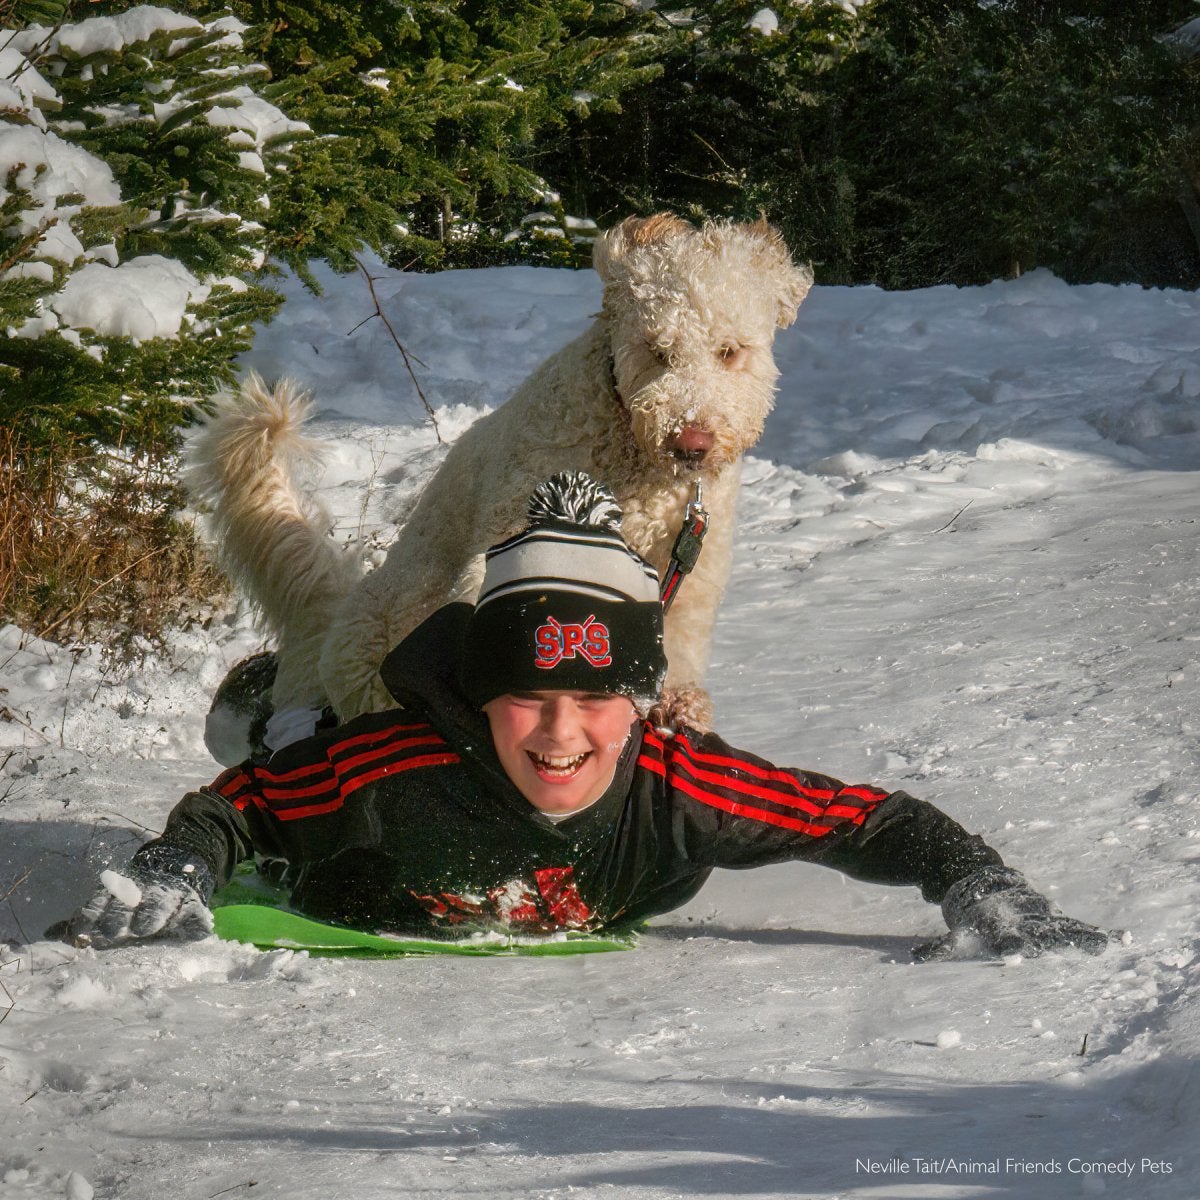 dog rides sled with young boy comedy pet photo awards